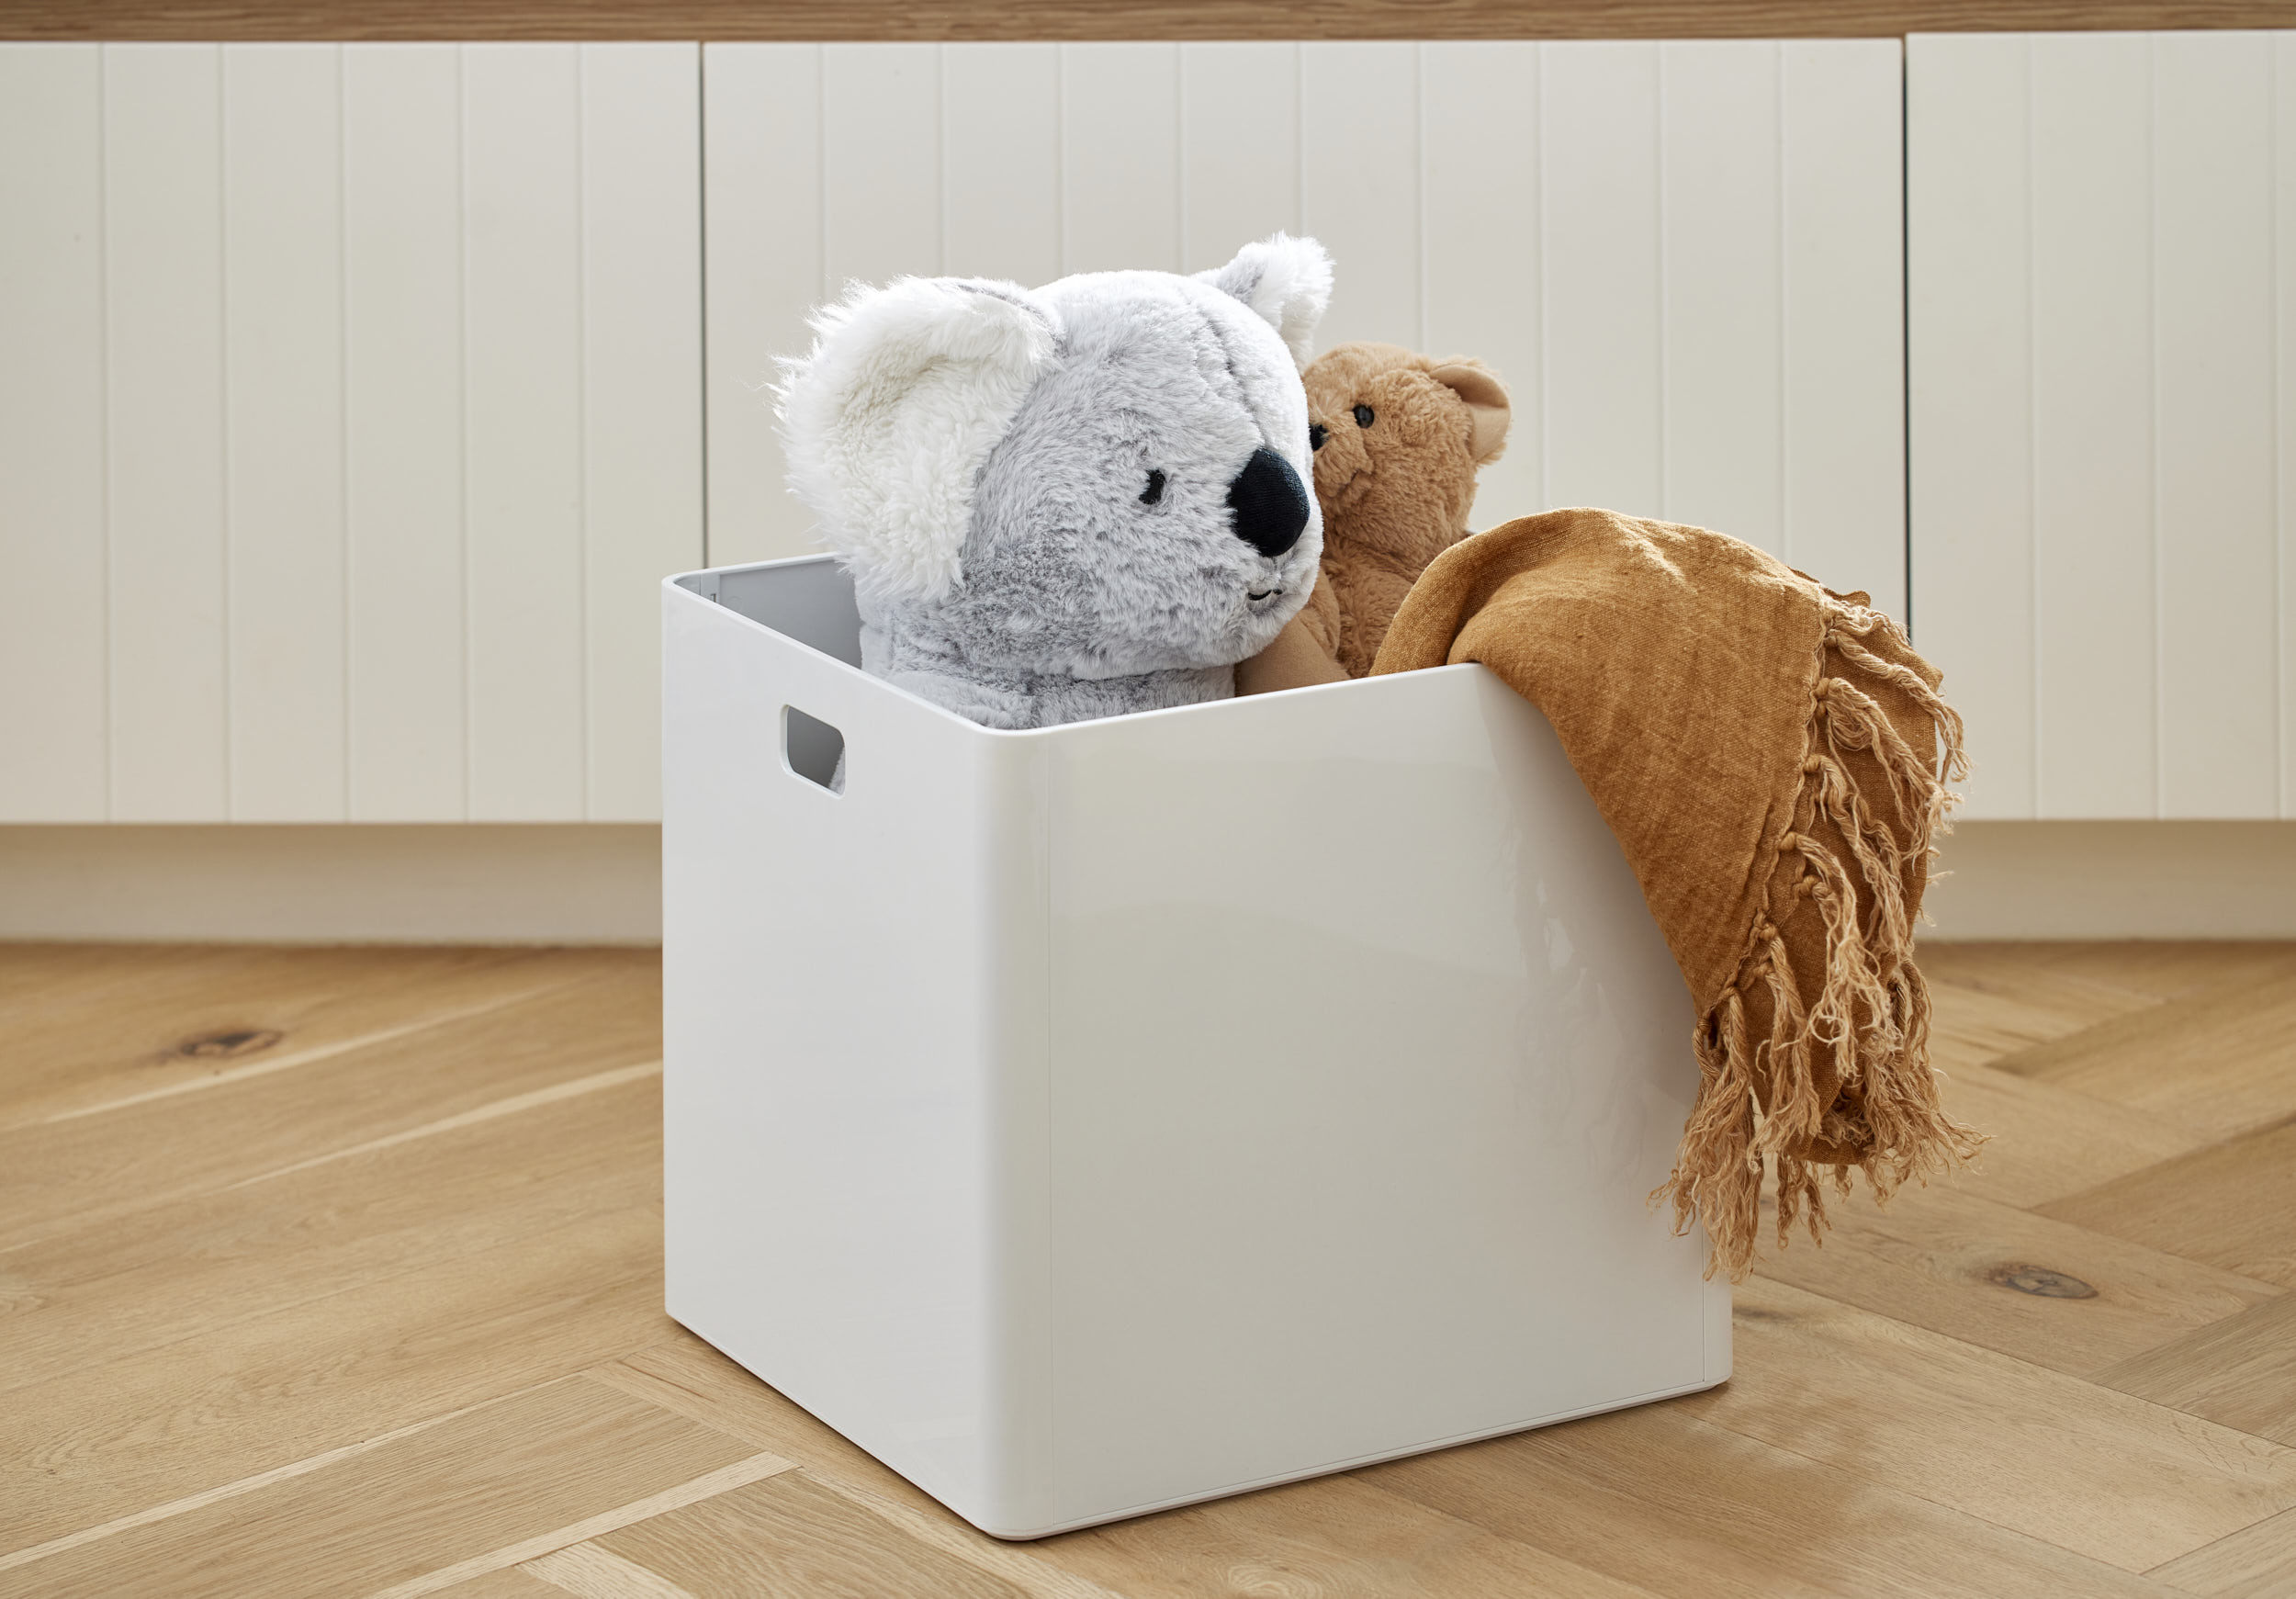 When getting the playroom in order, we recommend using a 27L stackable cube for storing larger toys. On top of the large cube, stack a mix of other sizes for smaller items, such as books, figurines and Lego.